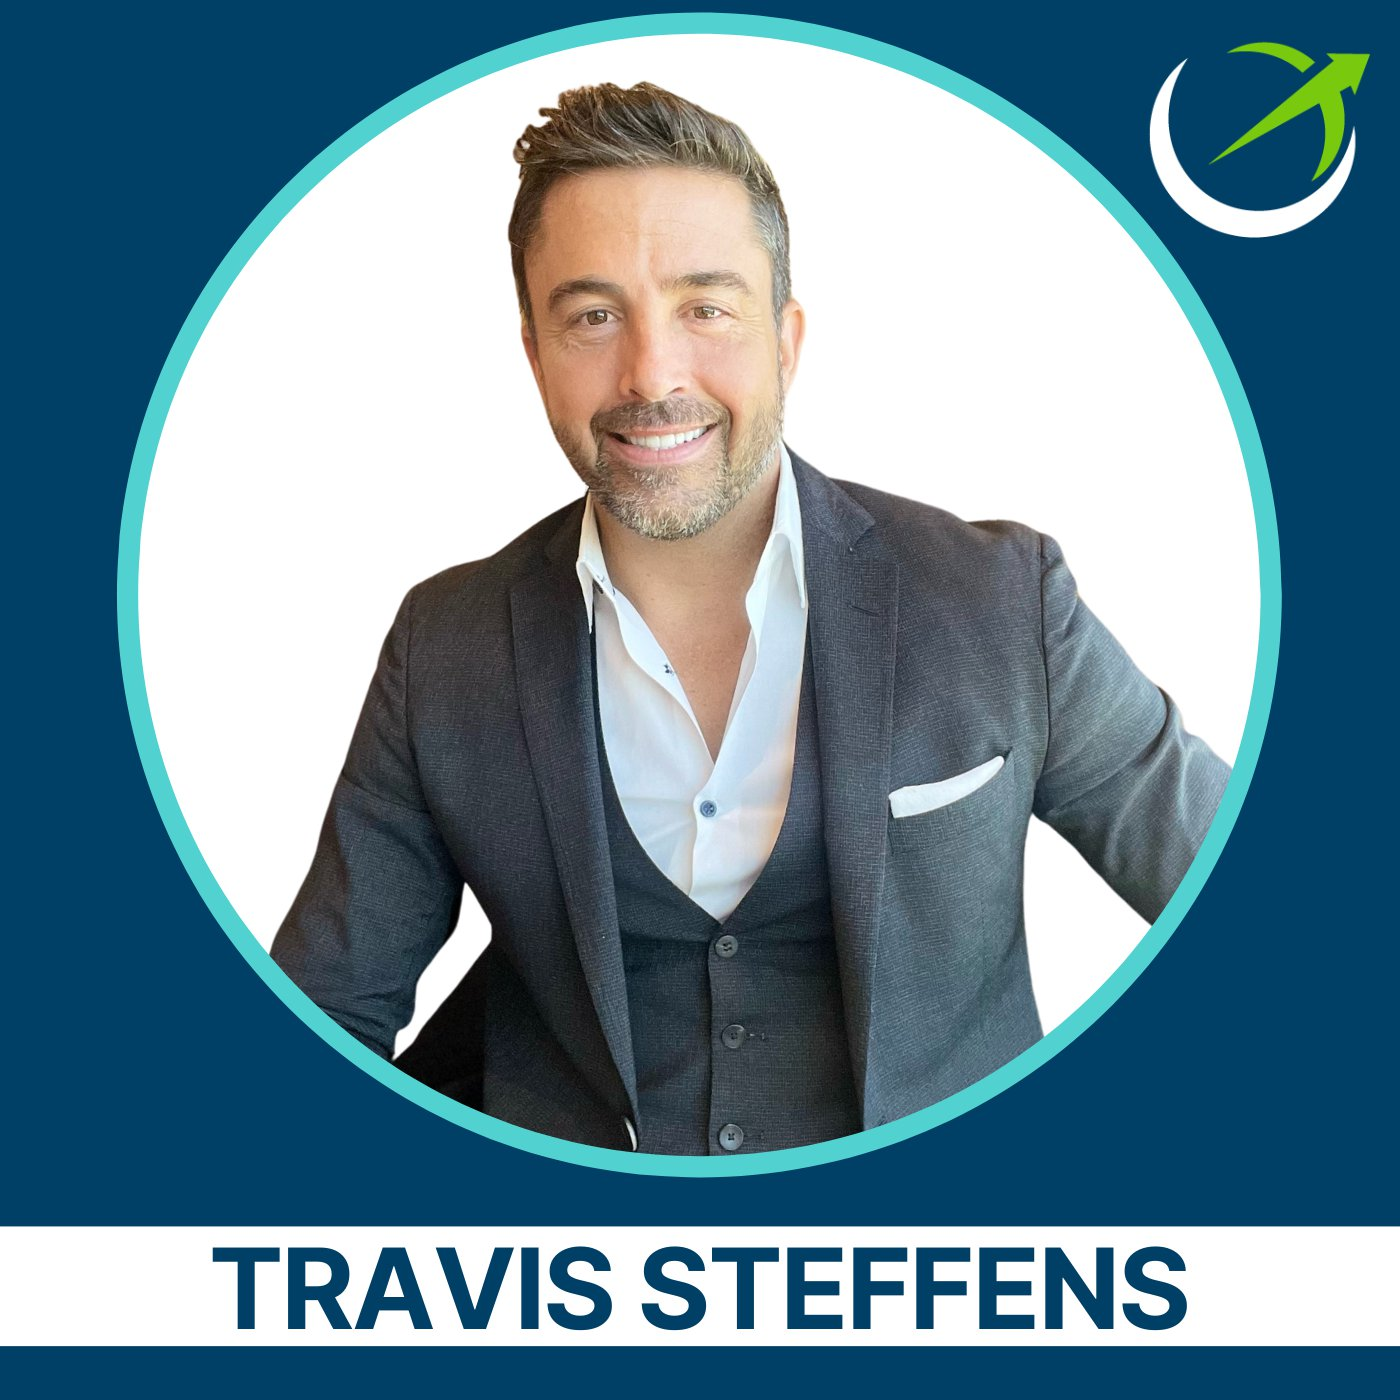 7 Minute Breathhold Instruction, Multi-Orgasmic Breathwork, DMT Activation, How He Rescued The Homeless With Breathing & Much More With Travis Steffens Of "The Breath Source" App.